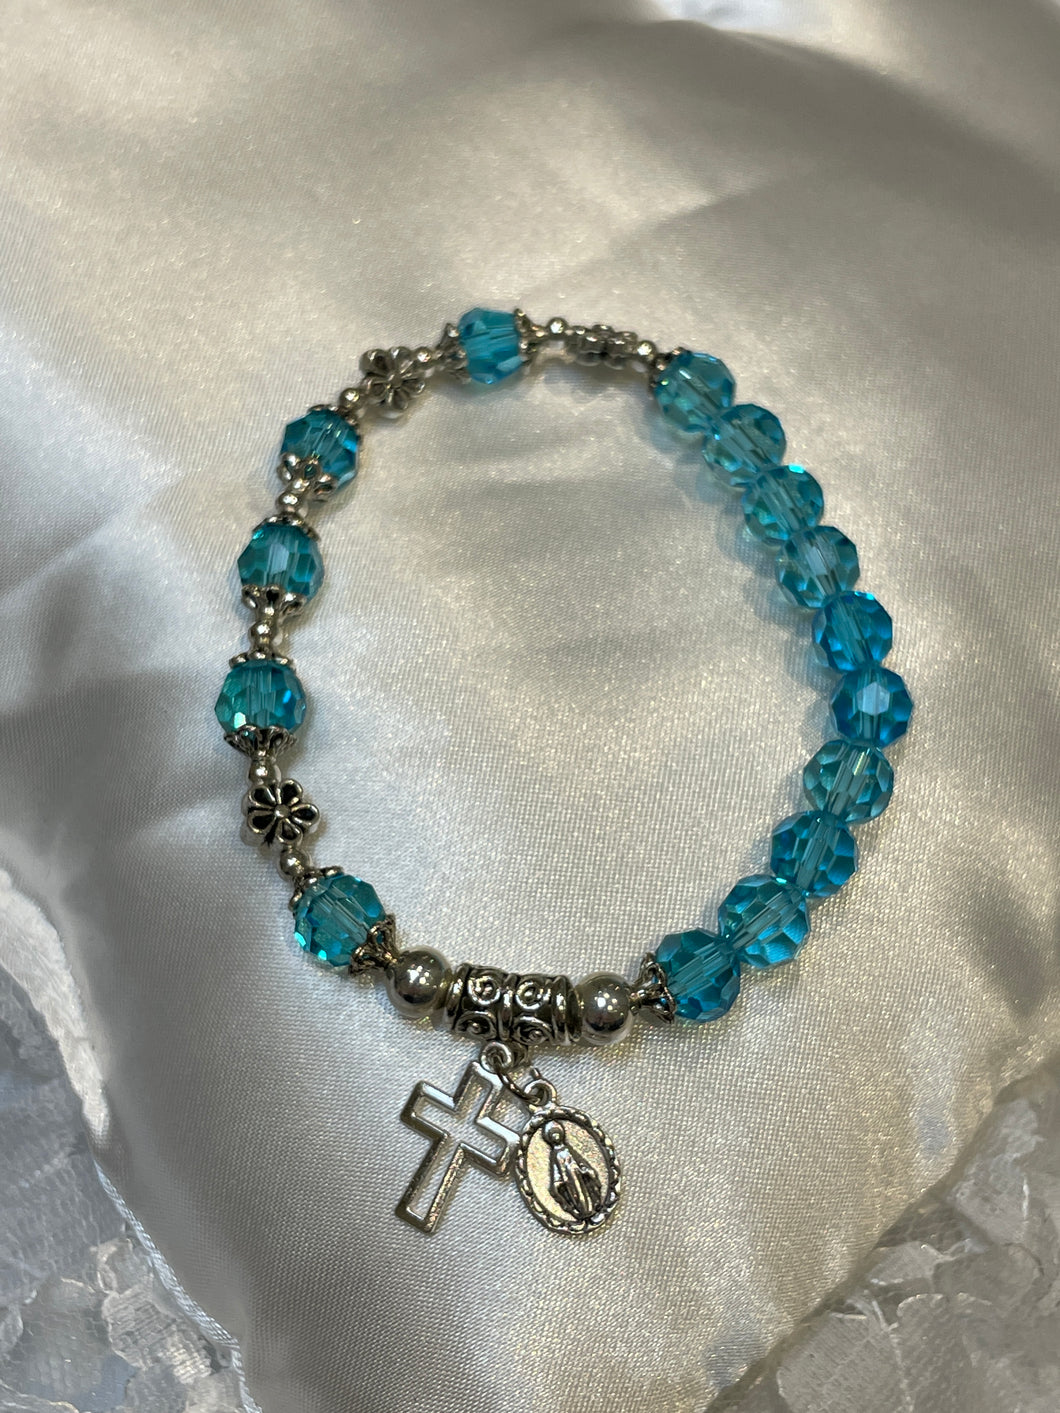 Bright Blue Crystal Rosary Bracelet with Miraculous Medal and Cross Charms